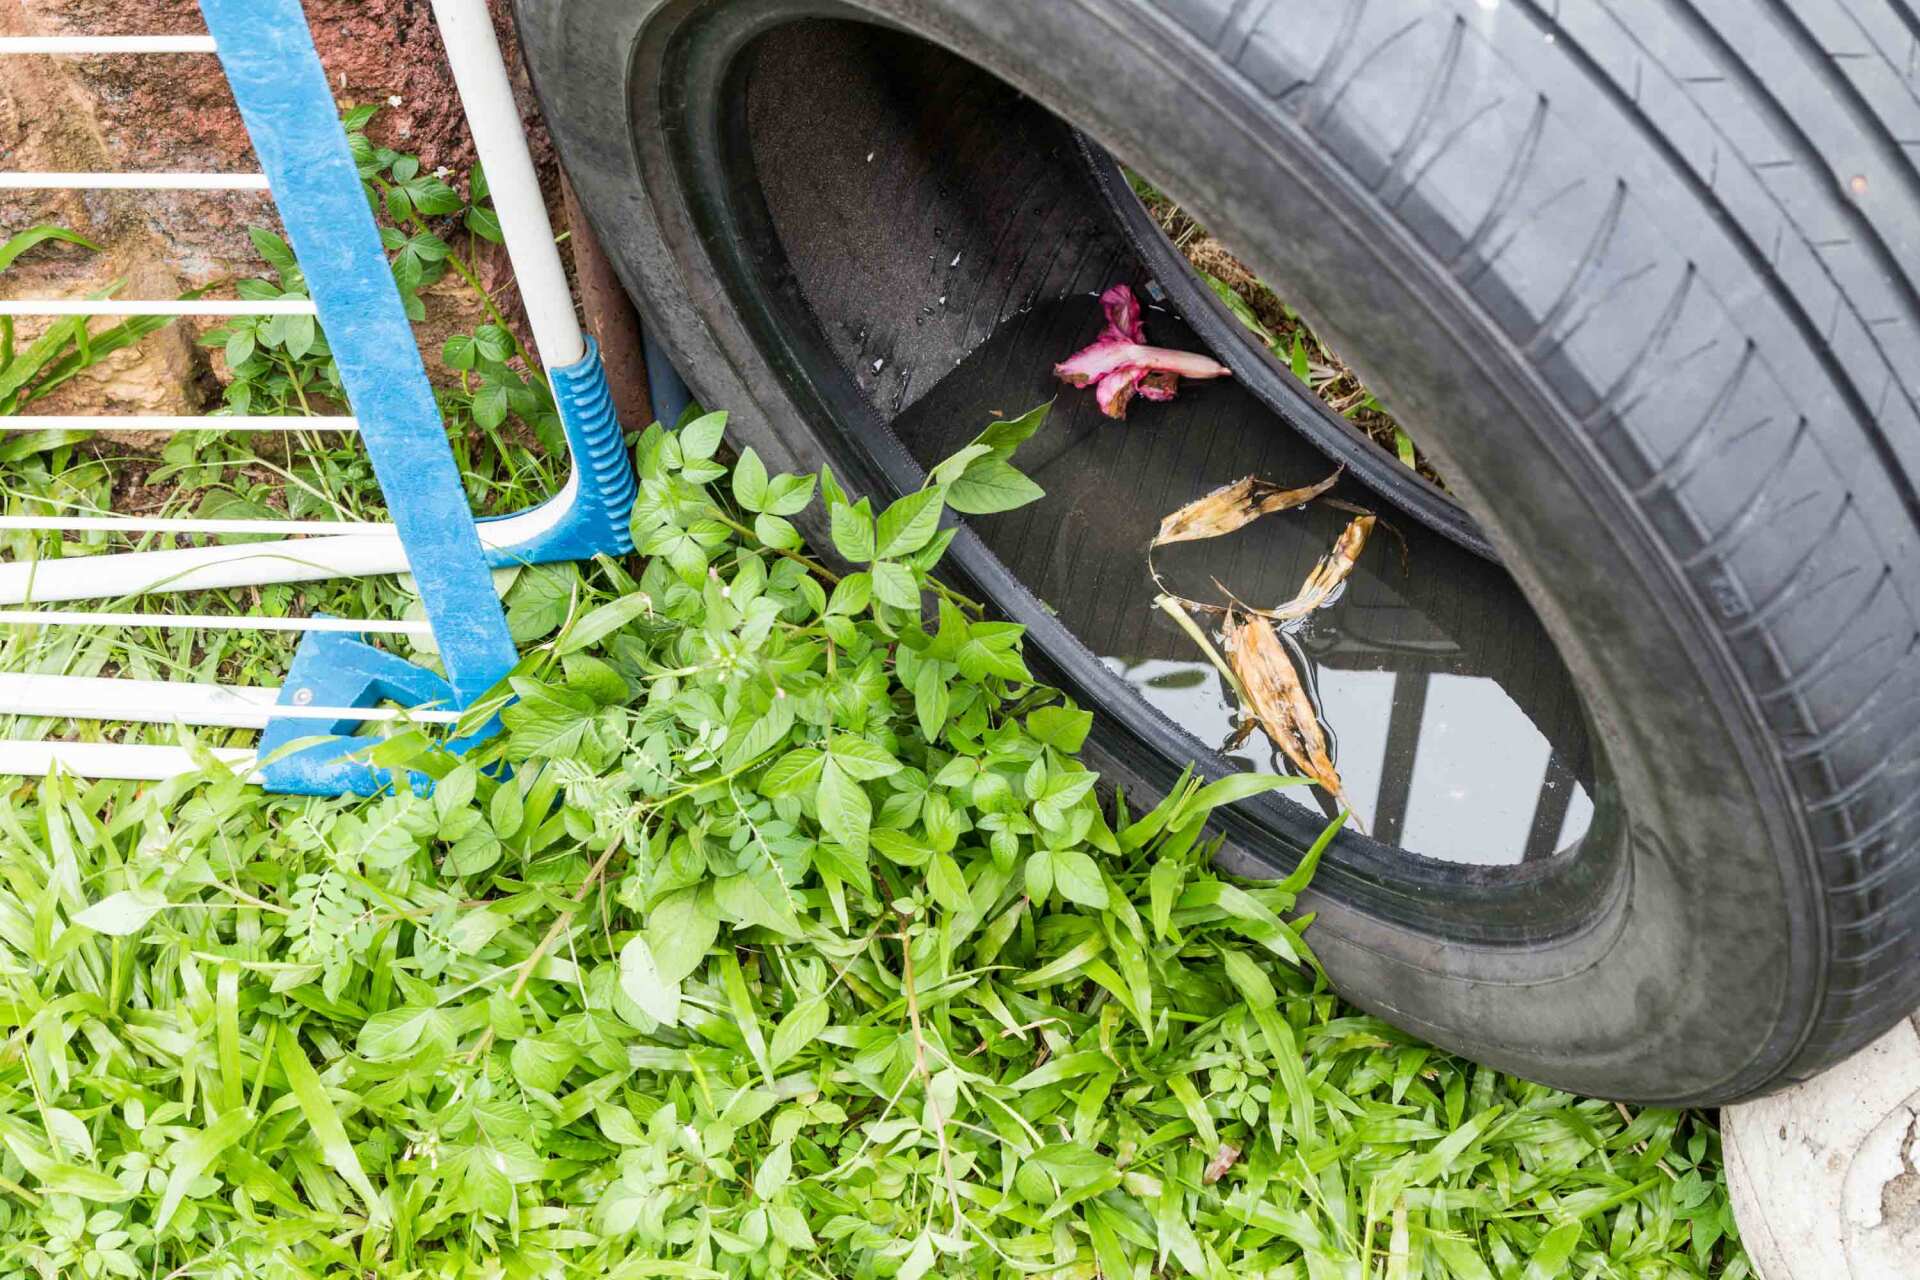 Used Tires Potentially Store Stagnant Water And Mosquitoes Breed - Warren, MI - Maple Lane Pest Control